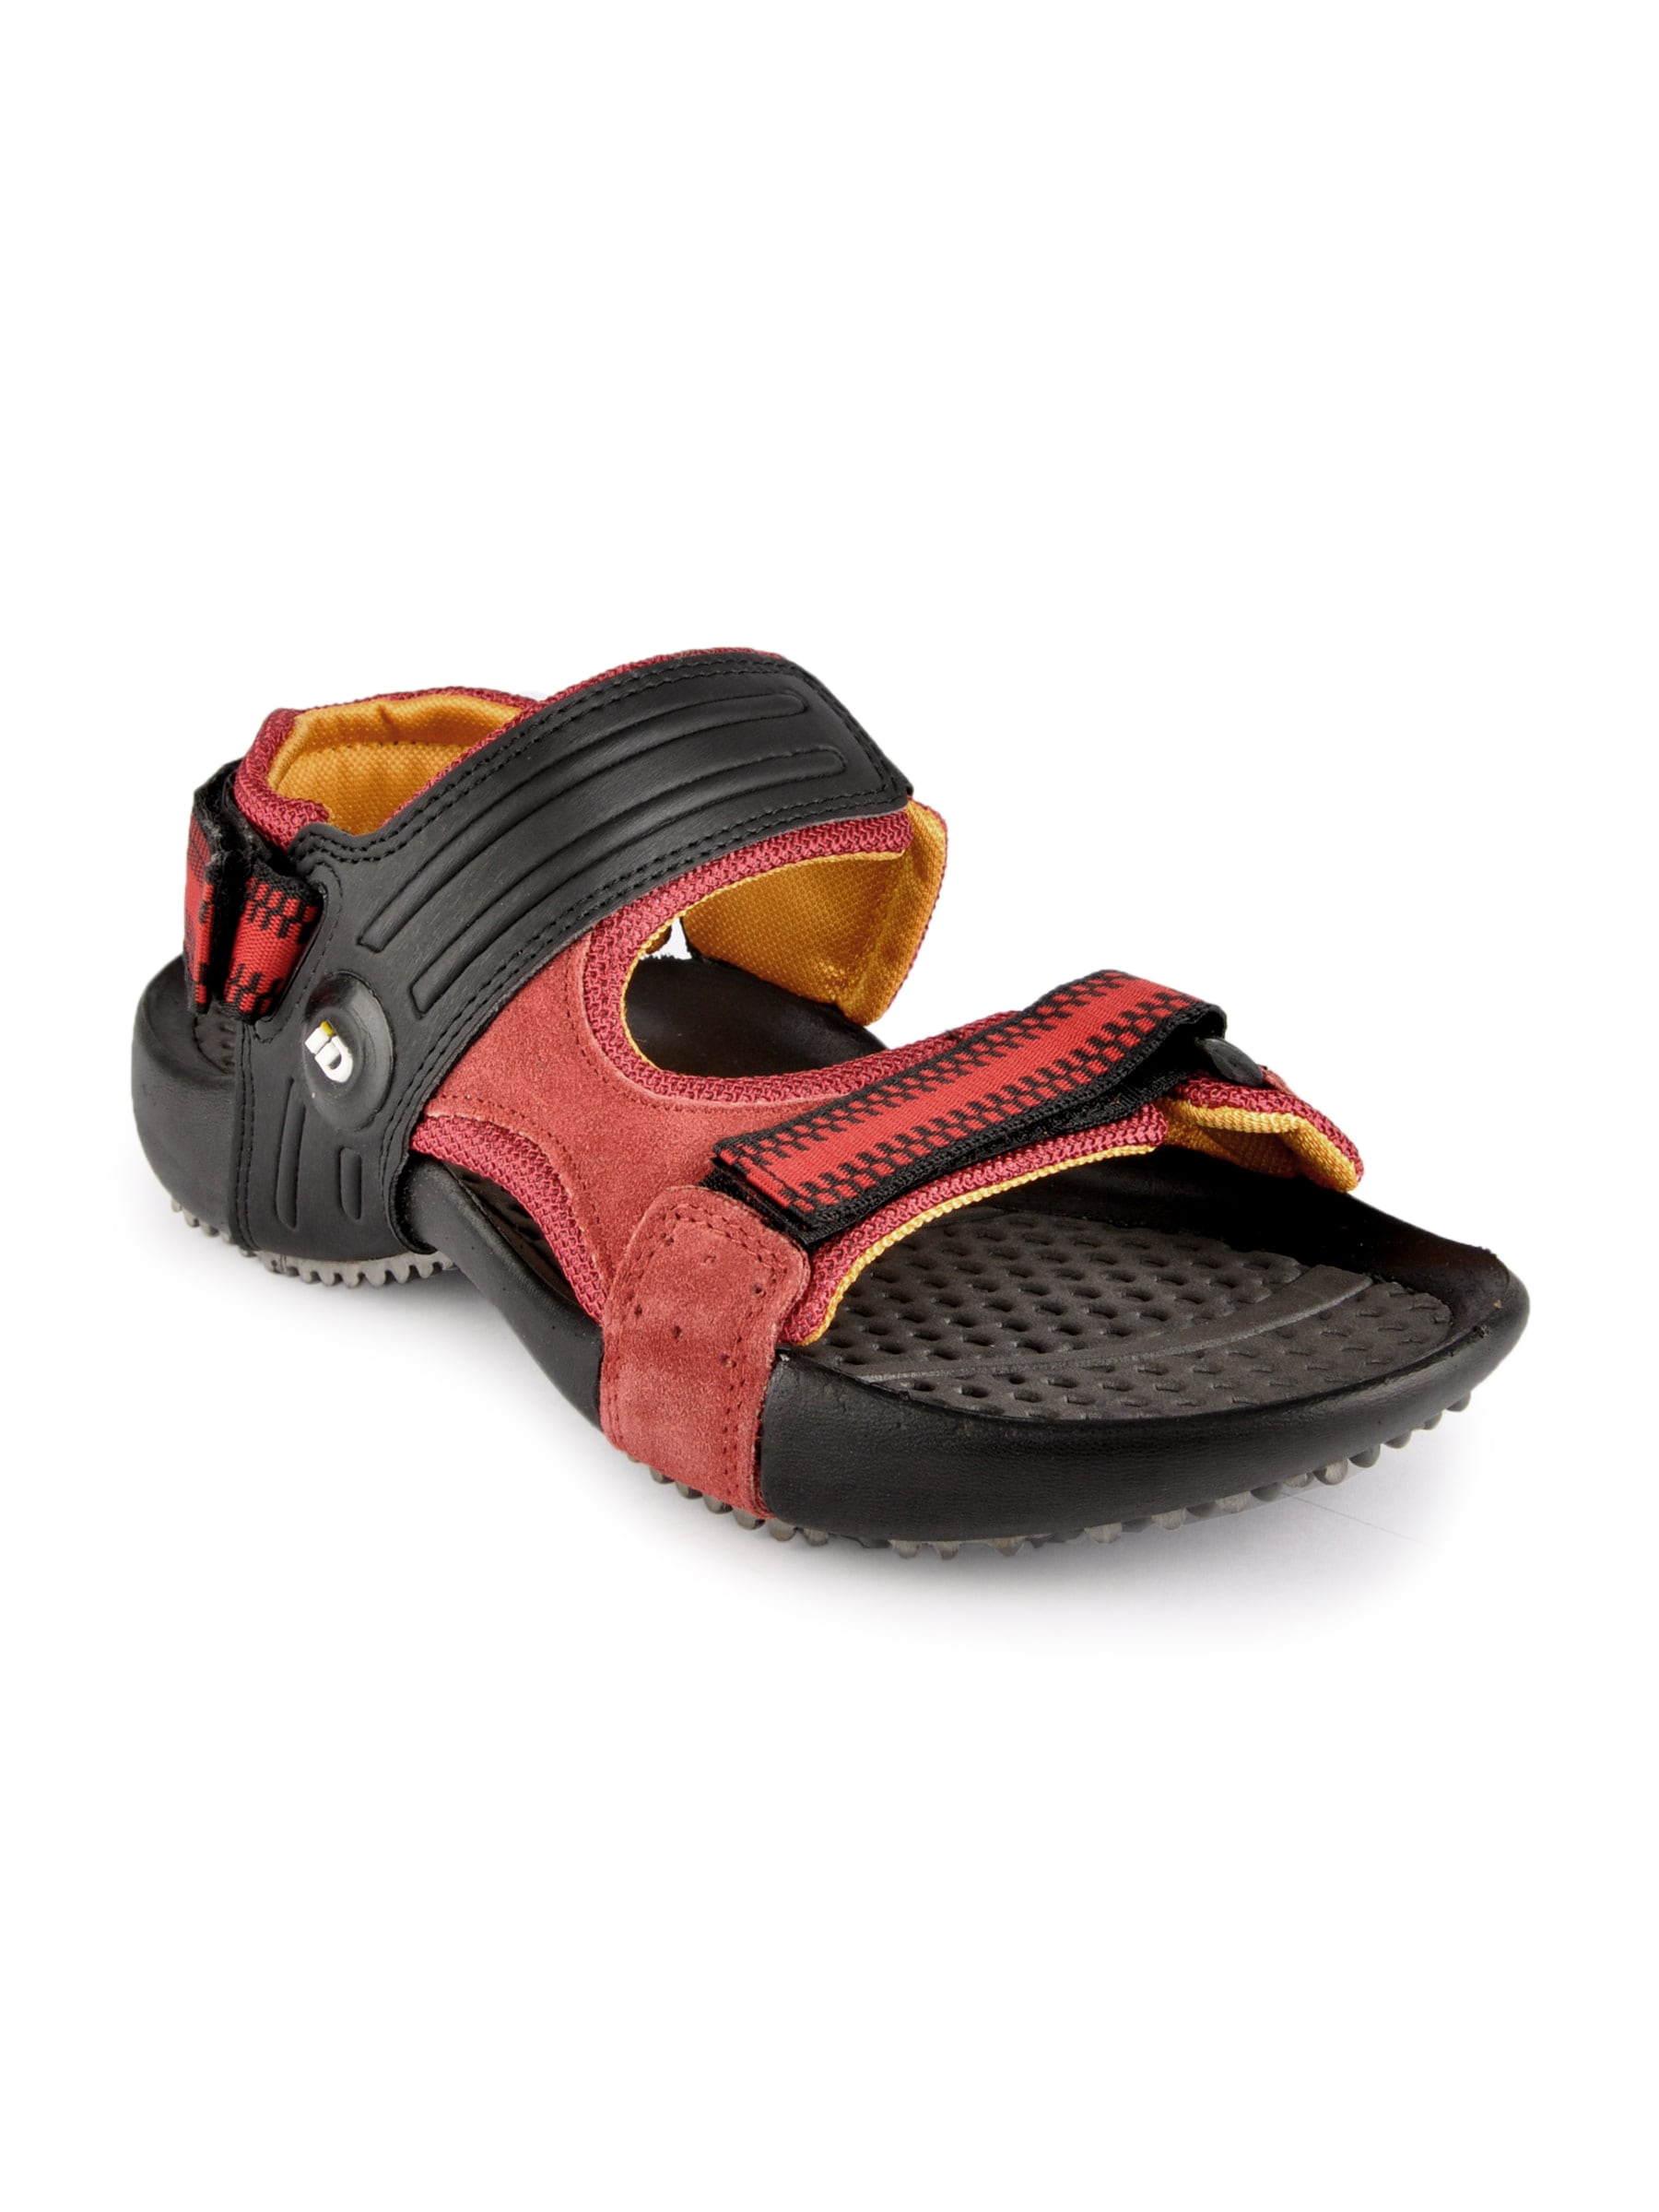 iD Men Casual Red Sandals